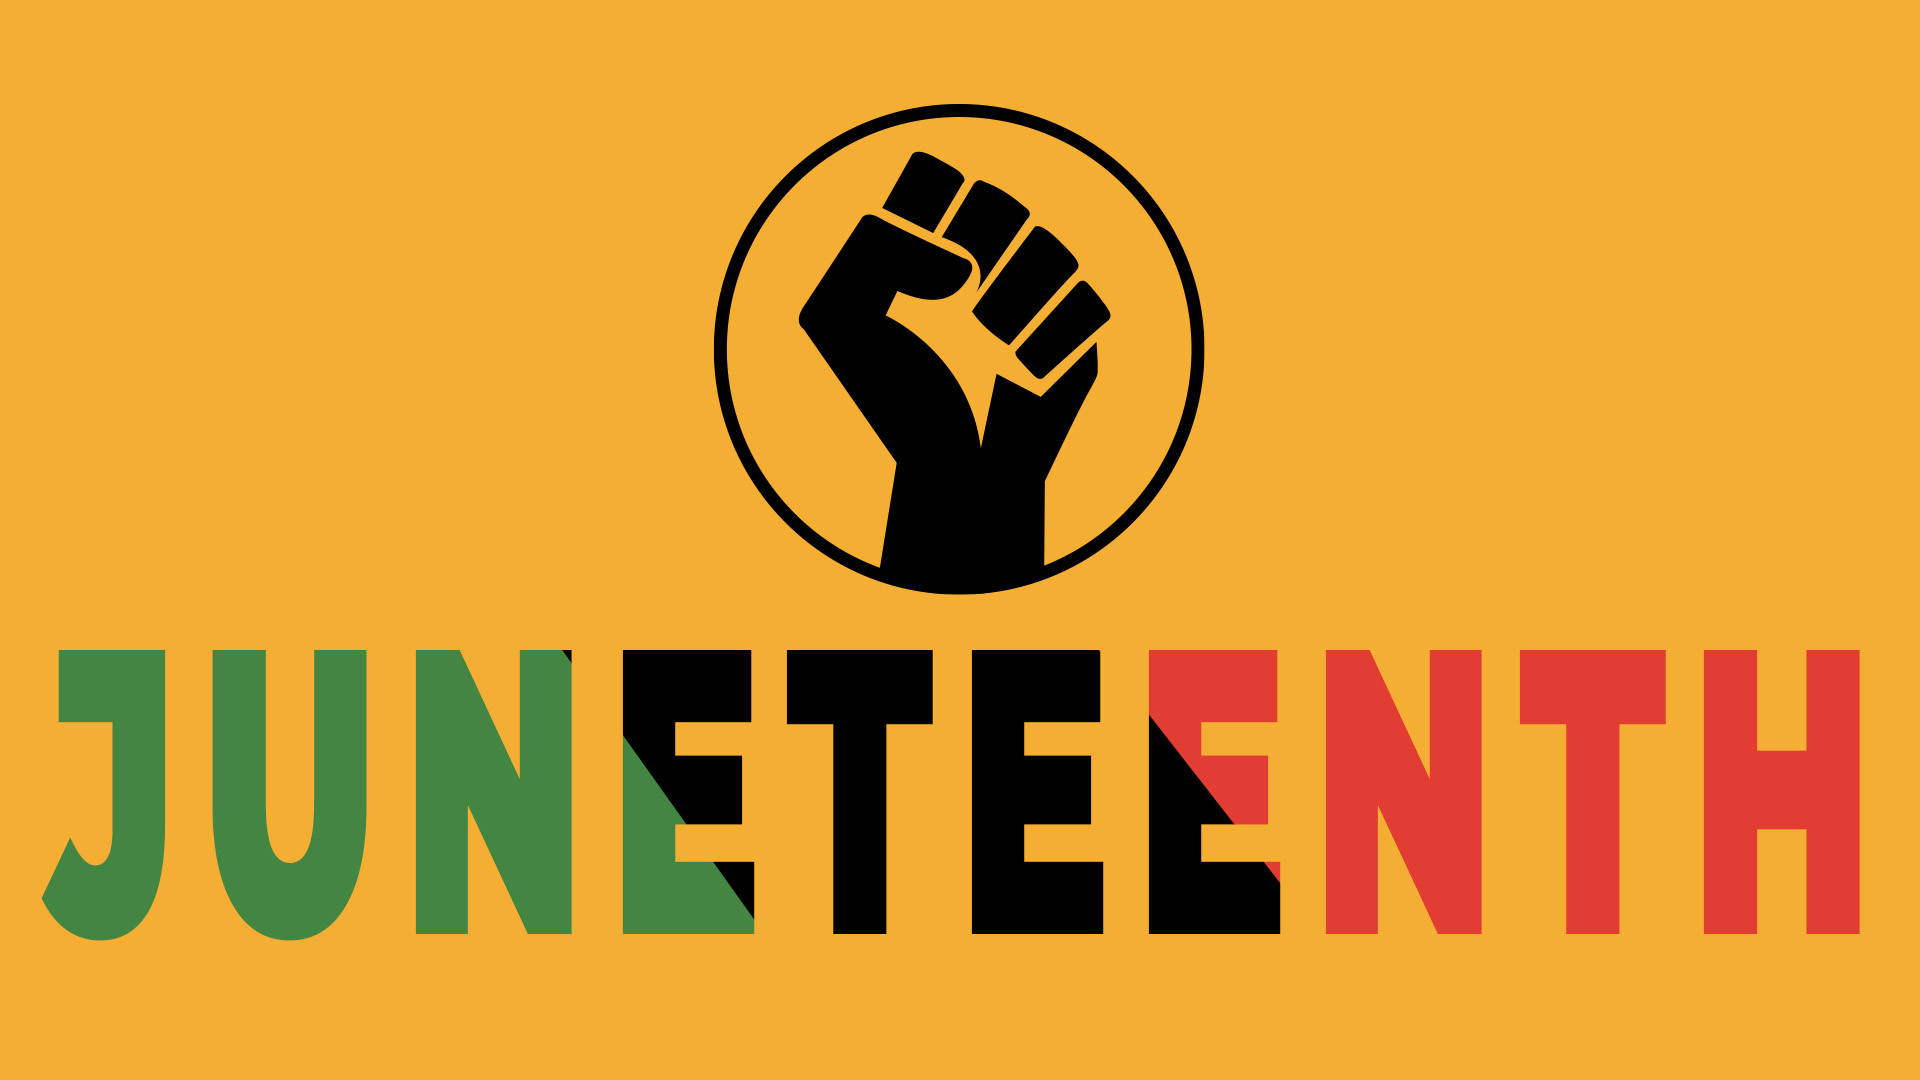 Juneteenth Bold Letters With Fist Wallpaper